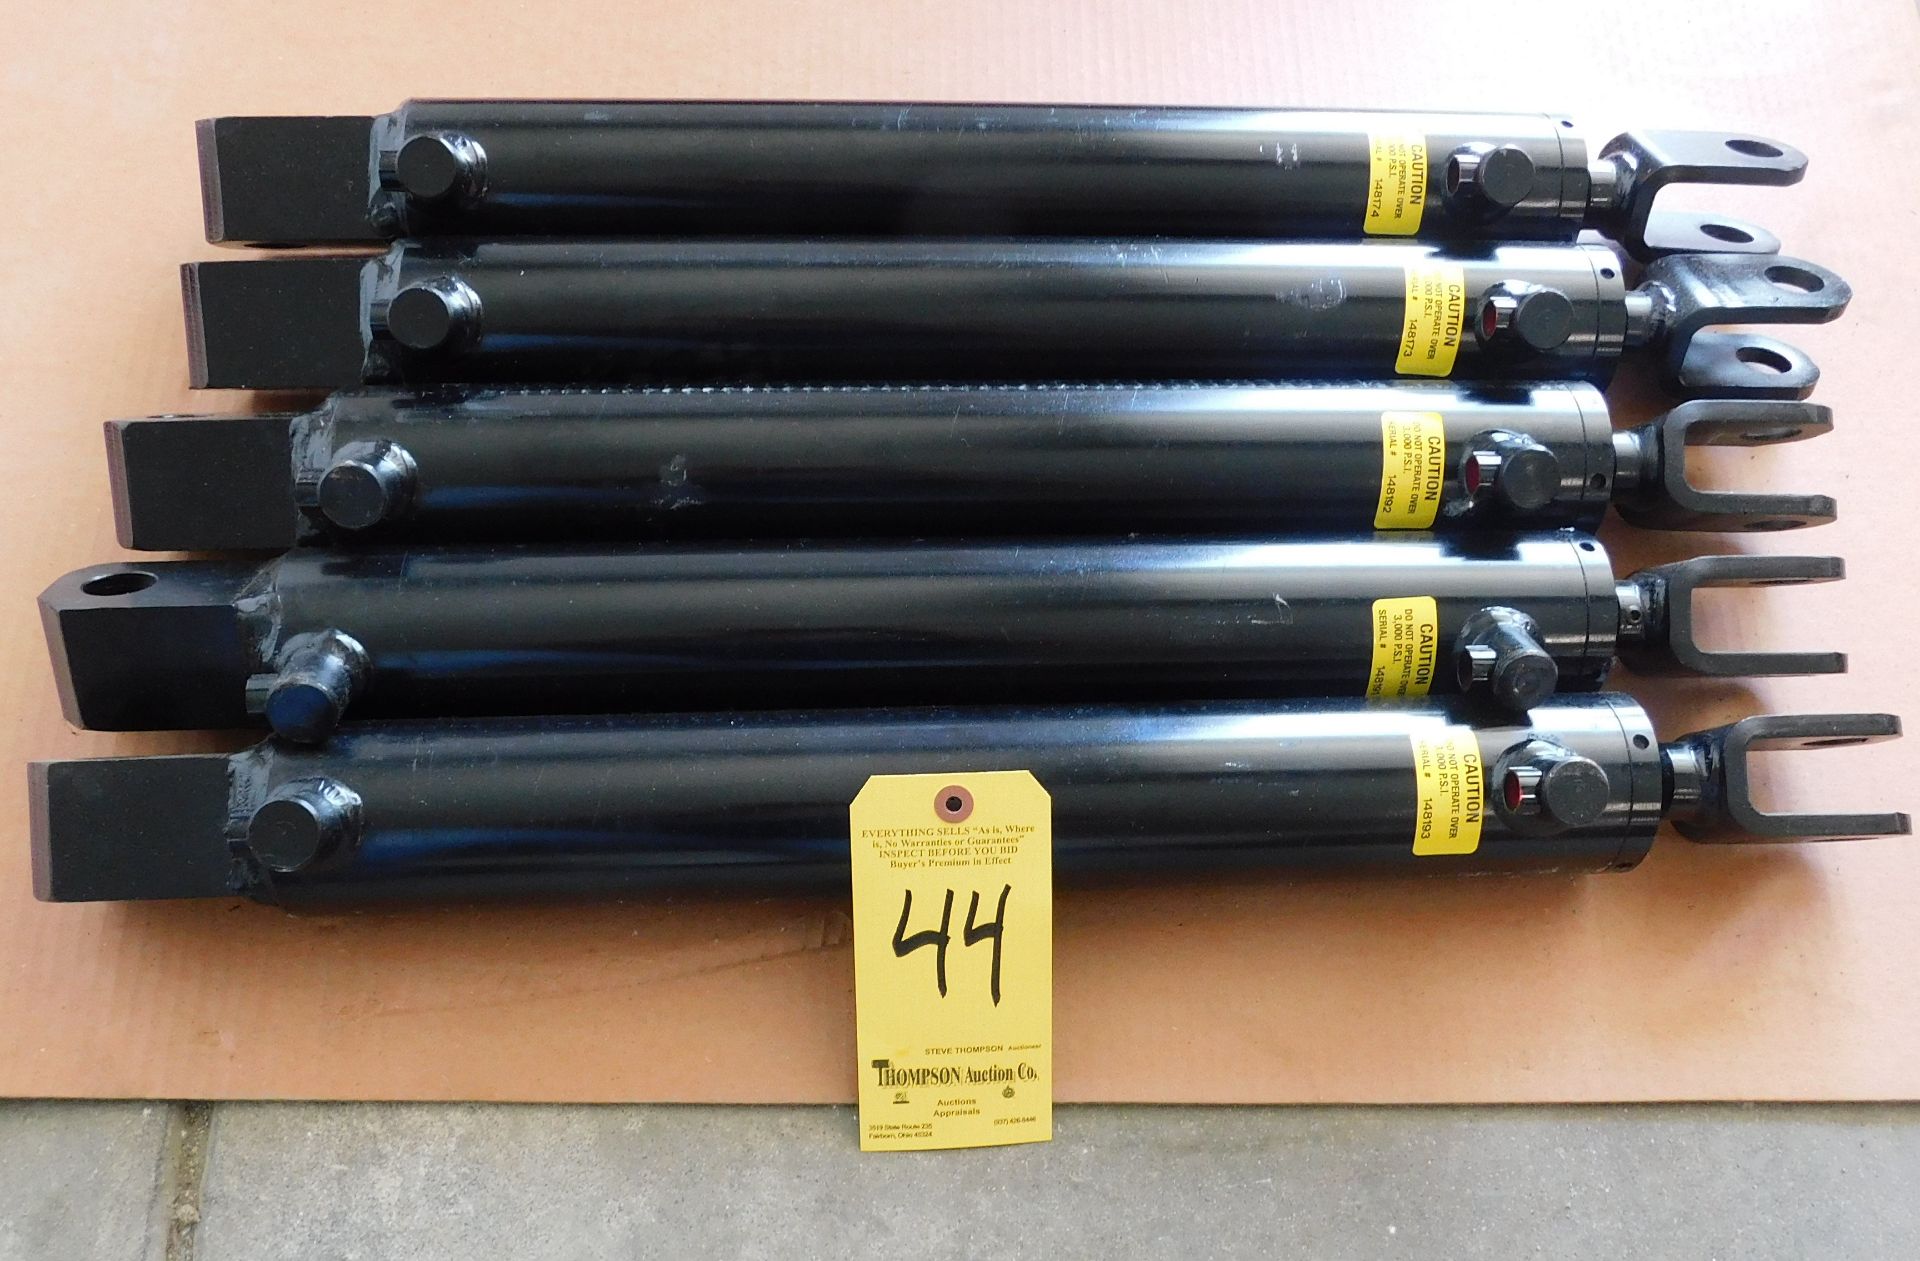 (5) Best Metal Prducts Double Acting Hydraulic Cylinders, Part #A-250-16.00 TL, 3,000 Max. PSI,